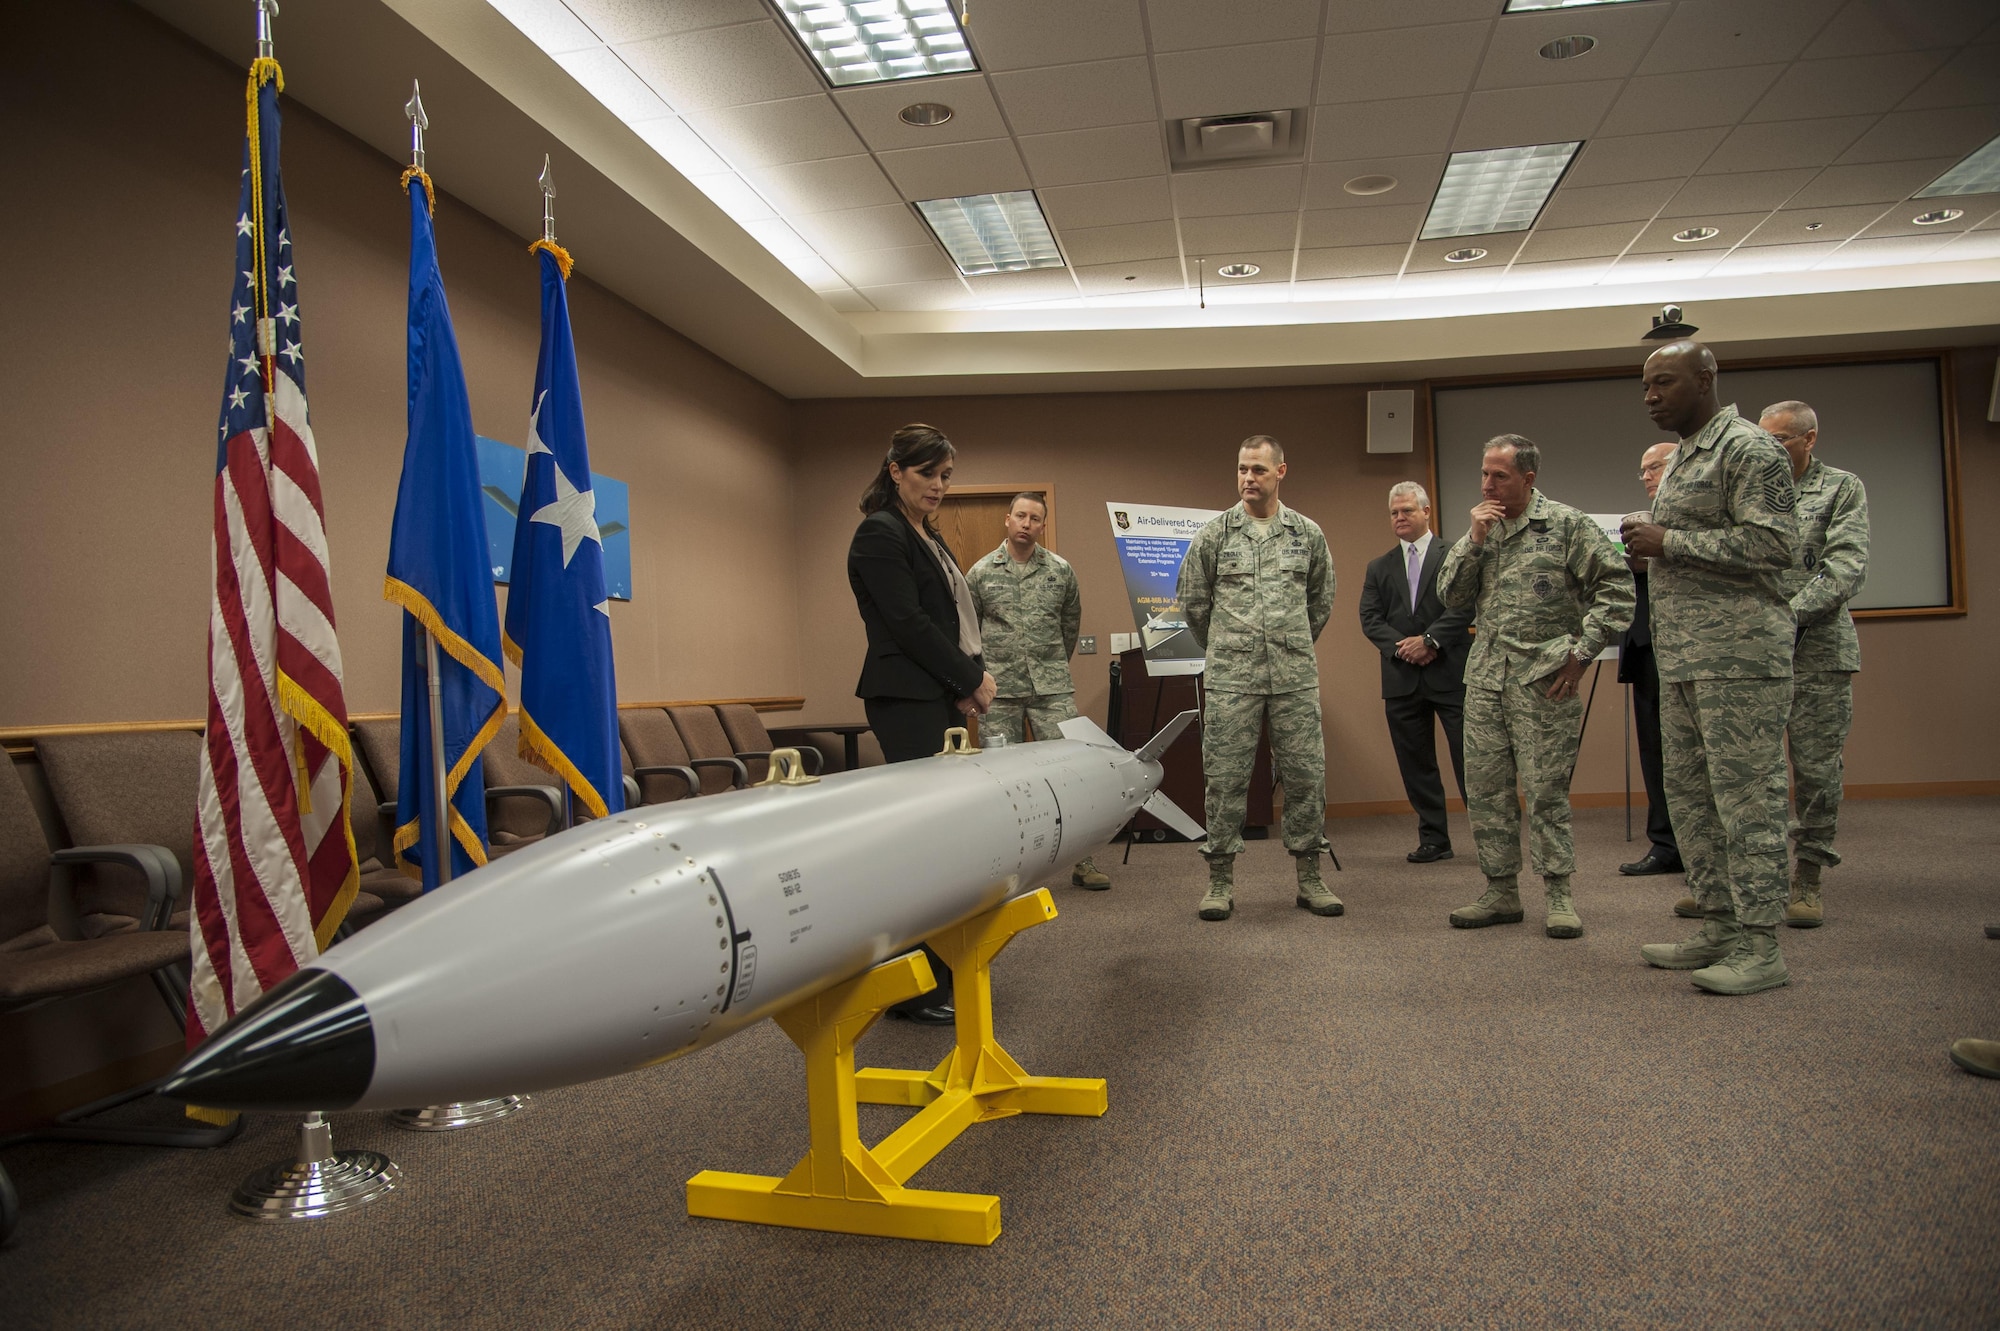 U.S. Air Force Chief of Staff Gen. David L. Goldfein is briefed in the Air Force Nuclear Weapon Center, at Kirtland Air Force Base, N.M., Oct. 19.